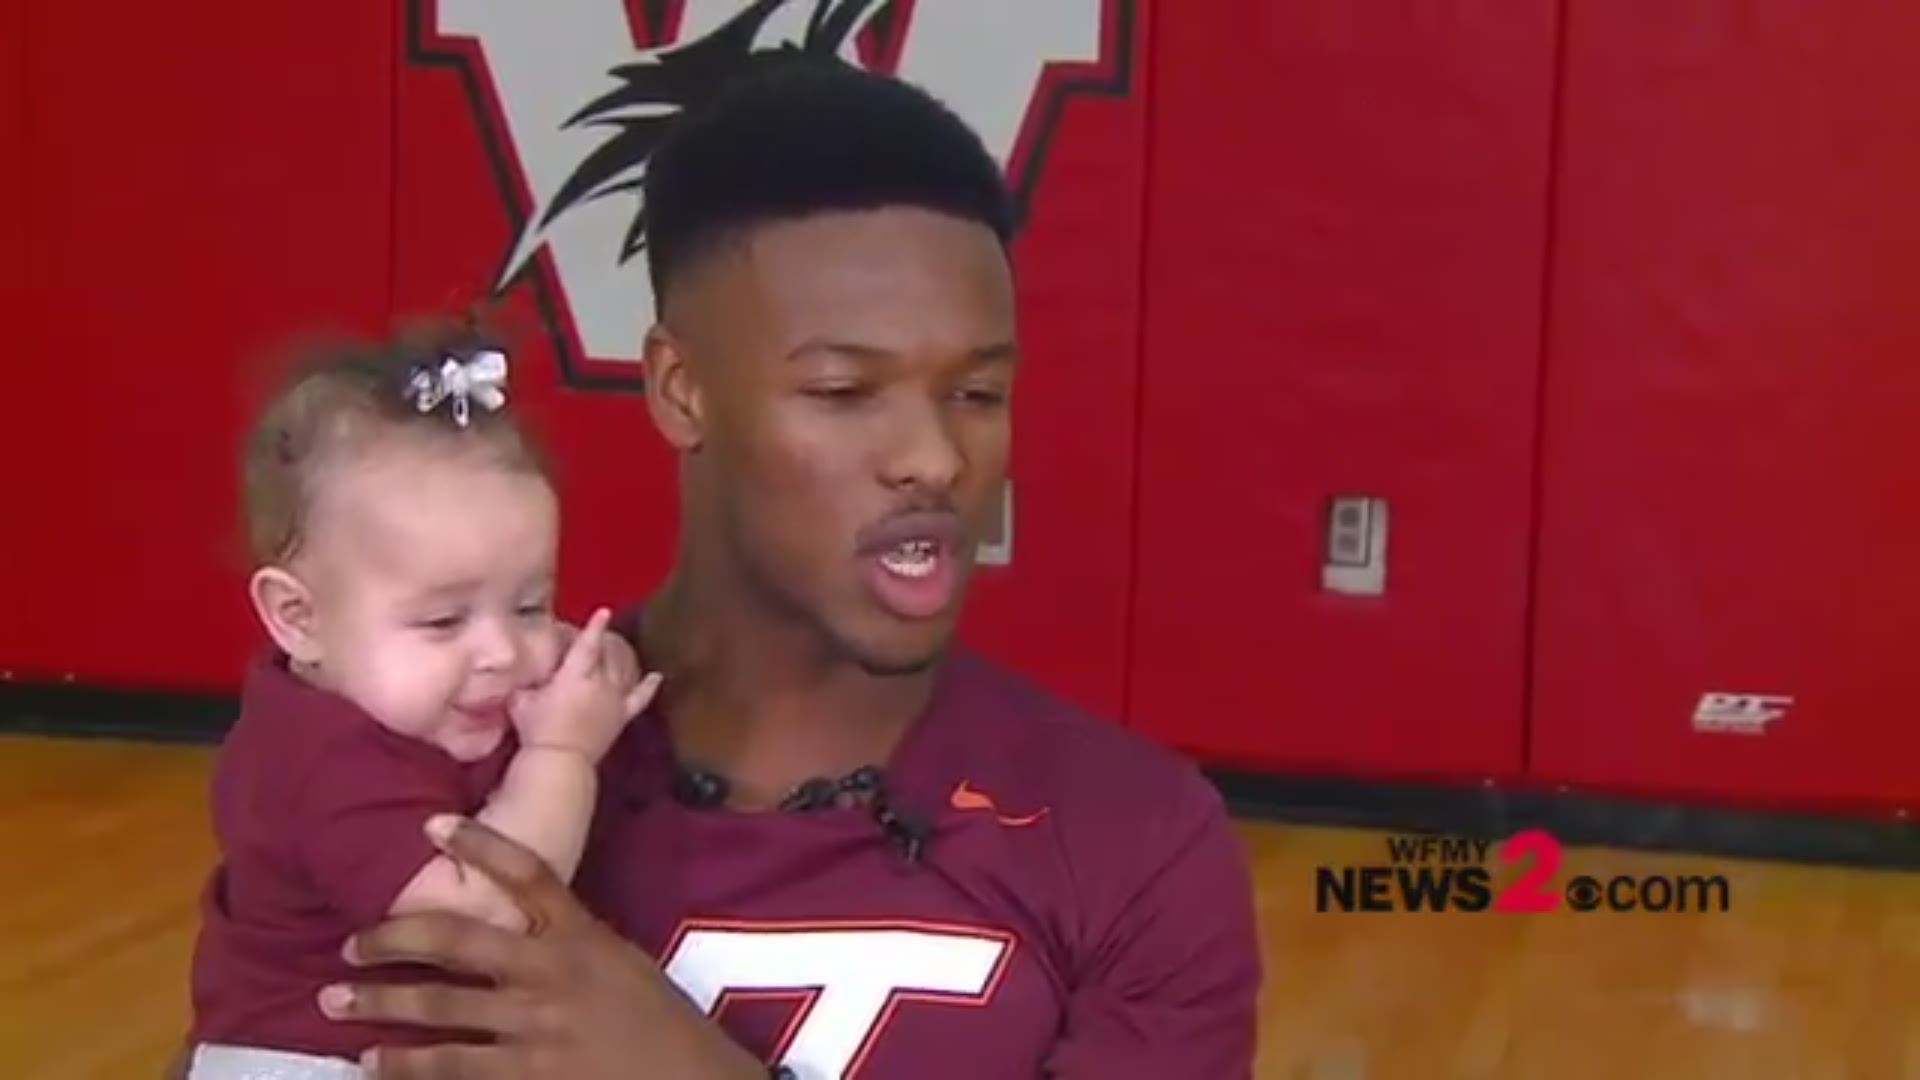 Walkertown High Basketball Player, Jalen Cone makes decision to commit to VA Tech. His daughter Ivy stole the show during the college announcement.